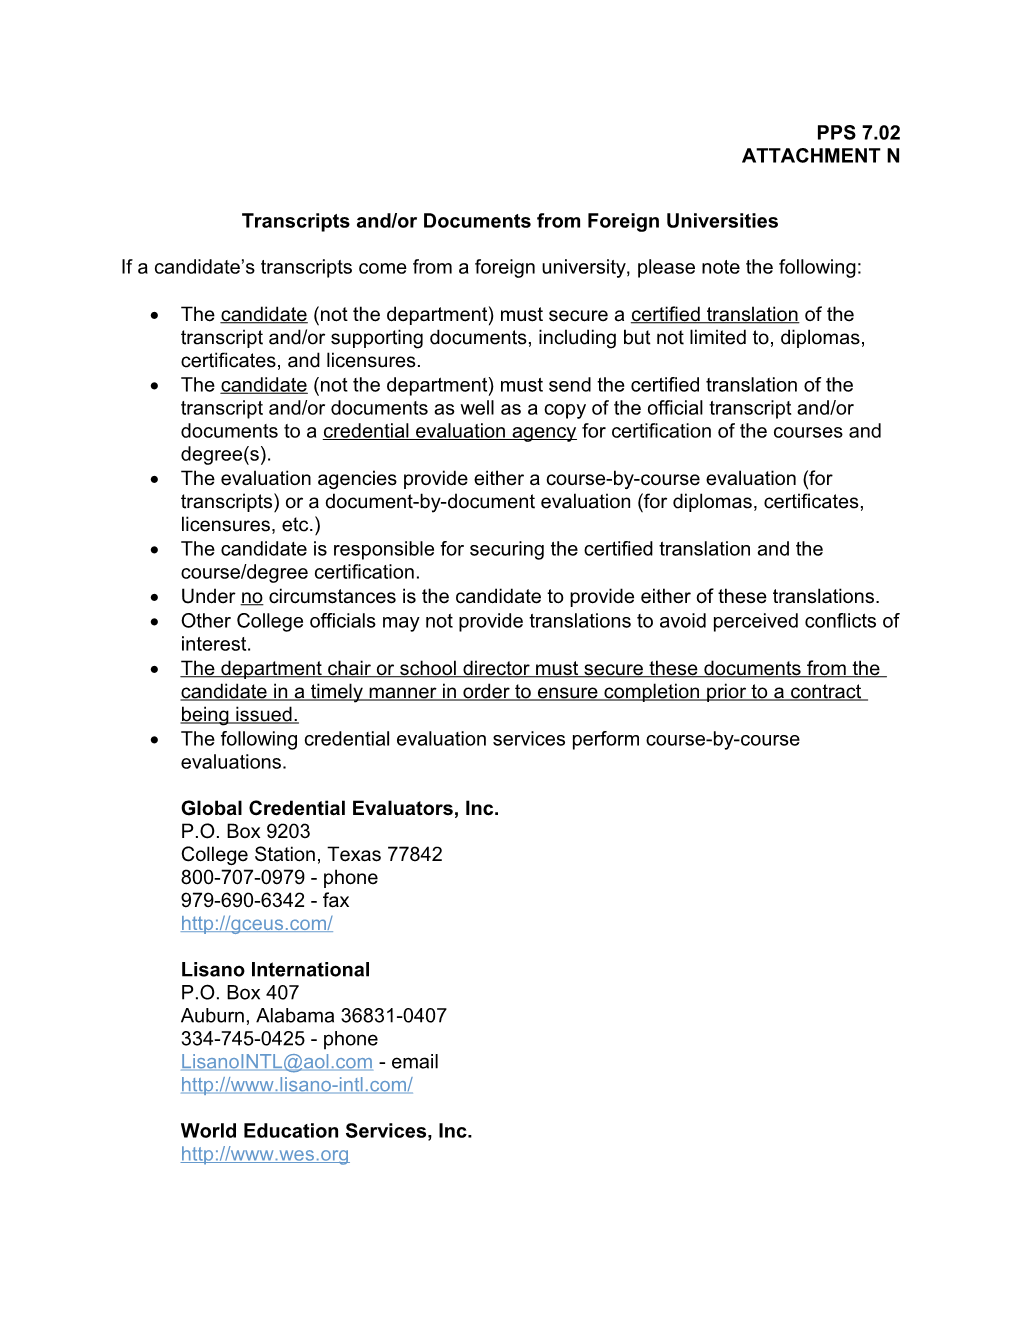 Transcripts And/Or Documents from Foreign Universities